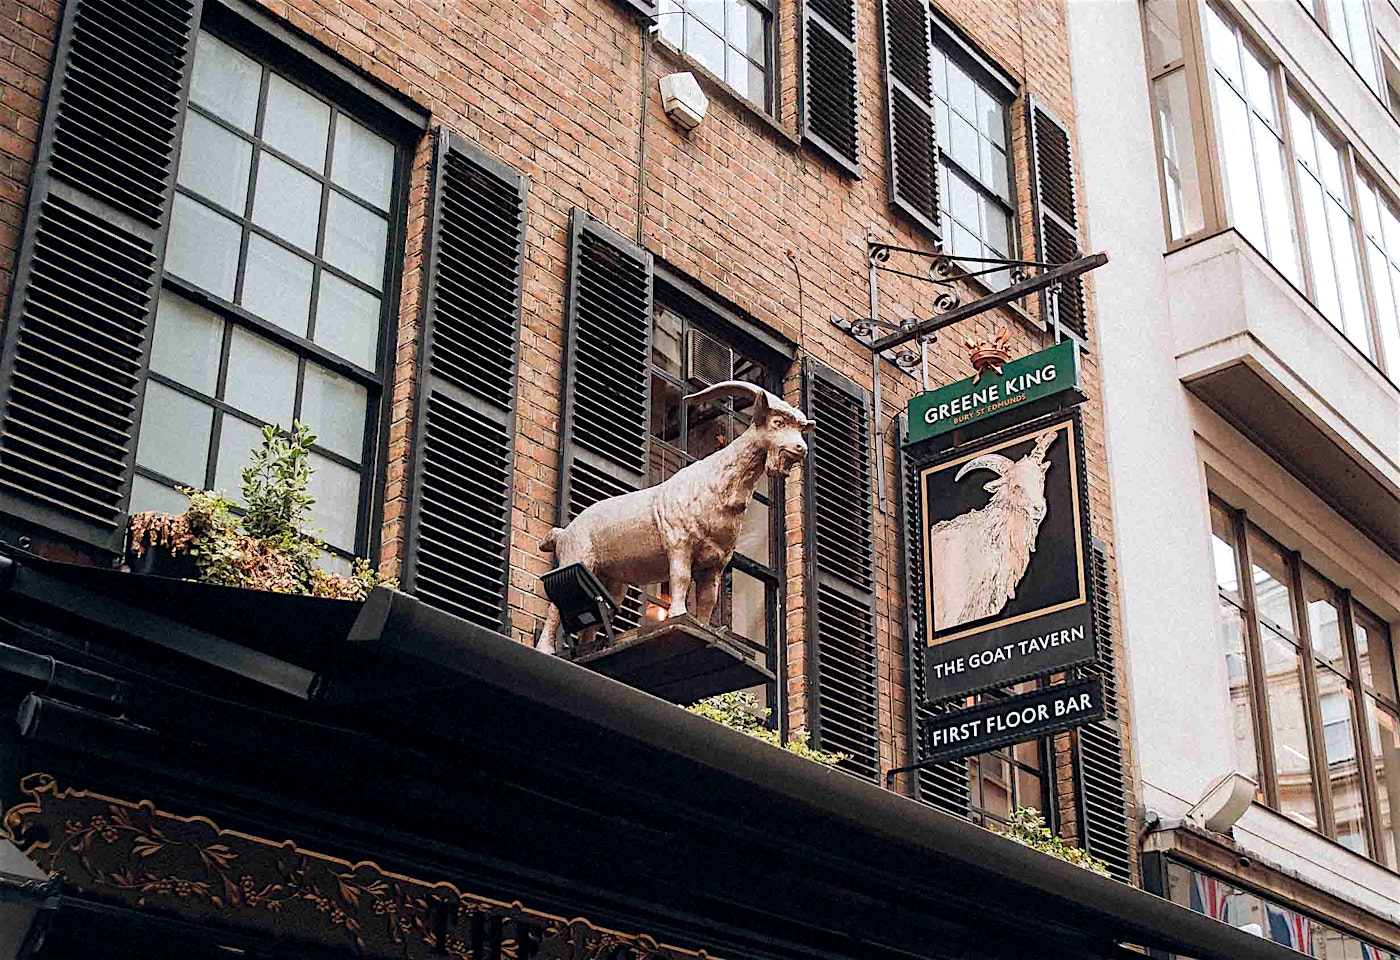 The Goat Mayfair pubs